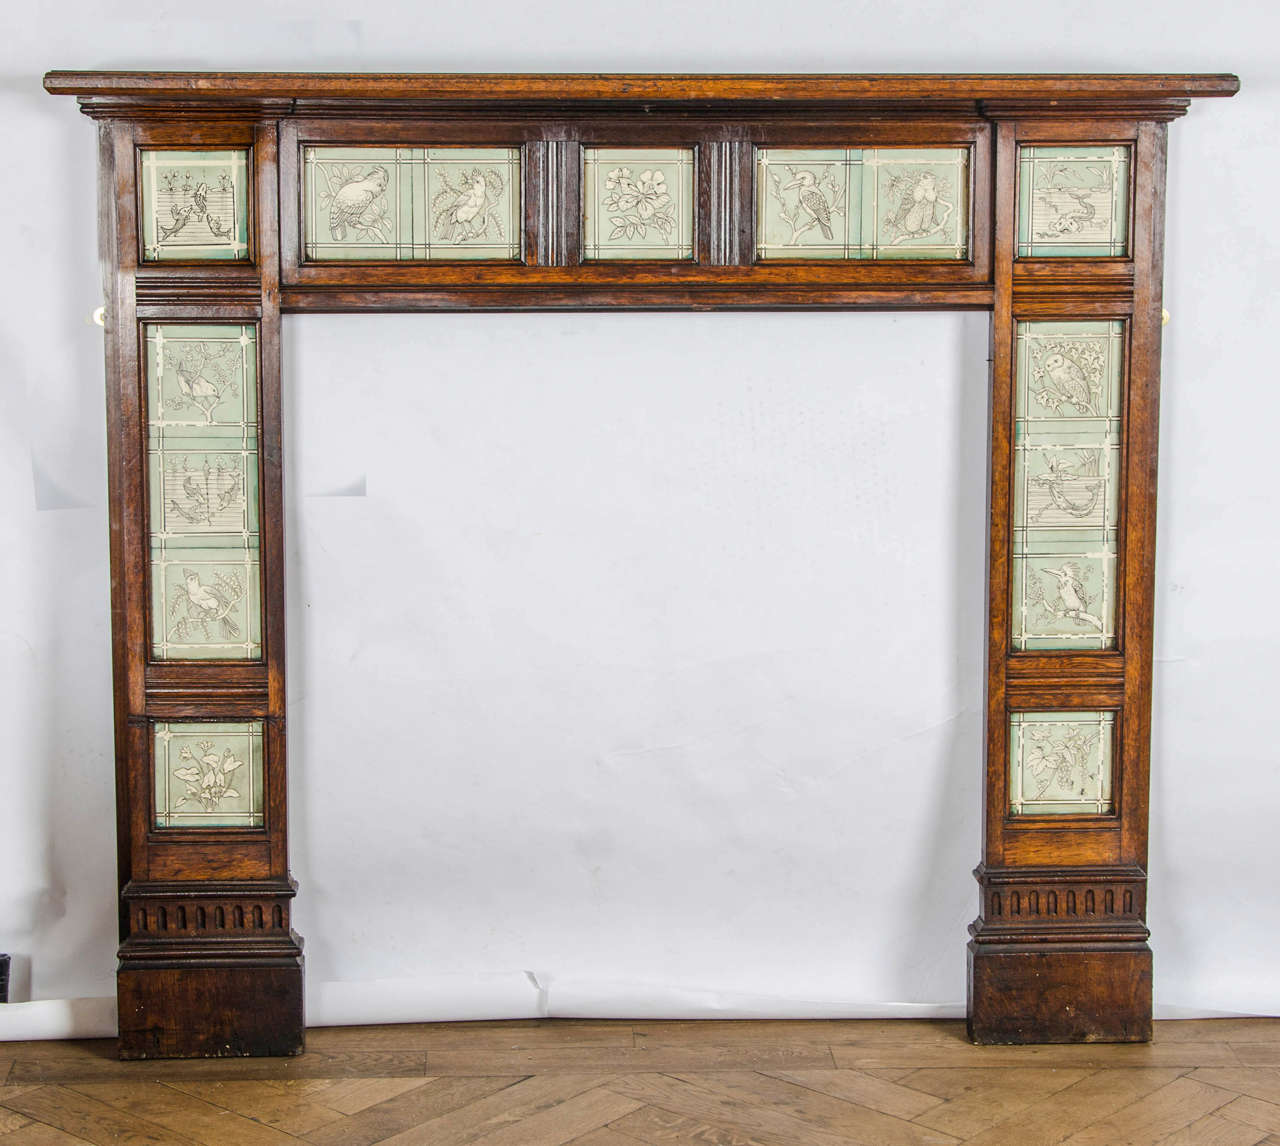 A charming example of a late Victorian Arts & Crafts fire surround in oak. This antique surround is decorated with 15 original Minton tiles which depict illustrations of different wildlife from birds to fish. This is a fantastic Arts & Crafts piece